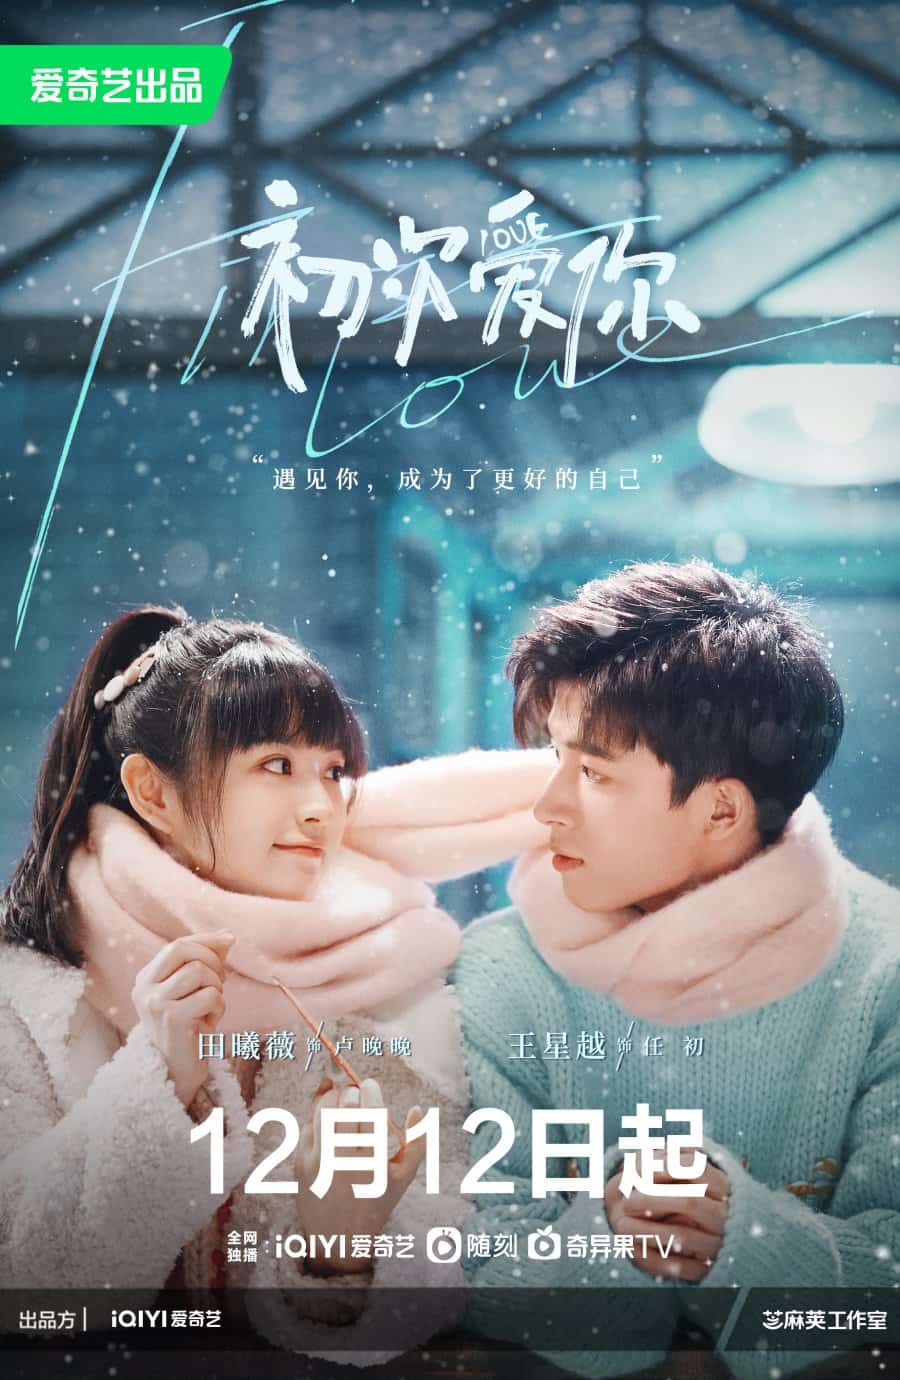 First Love - Sinopsis, Pemain, OST, Episode, Review